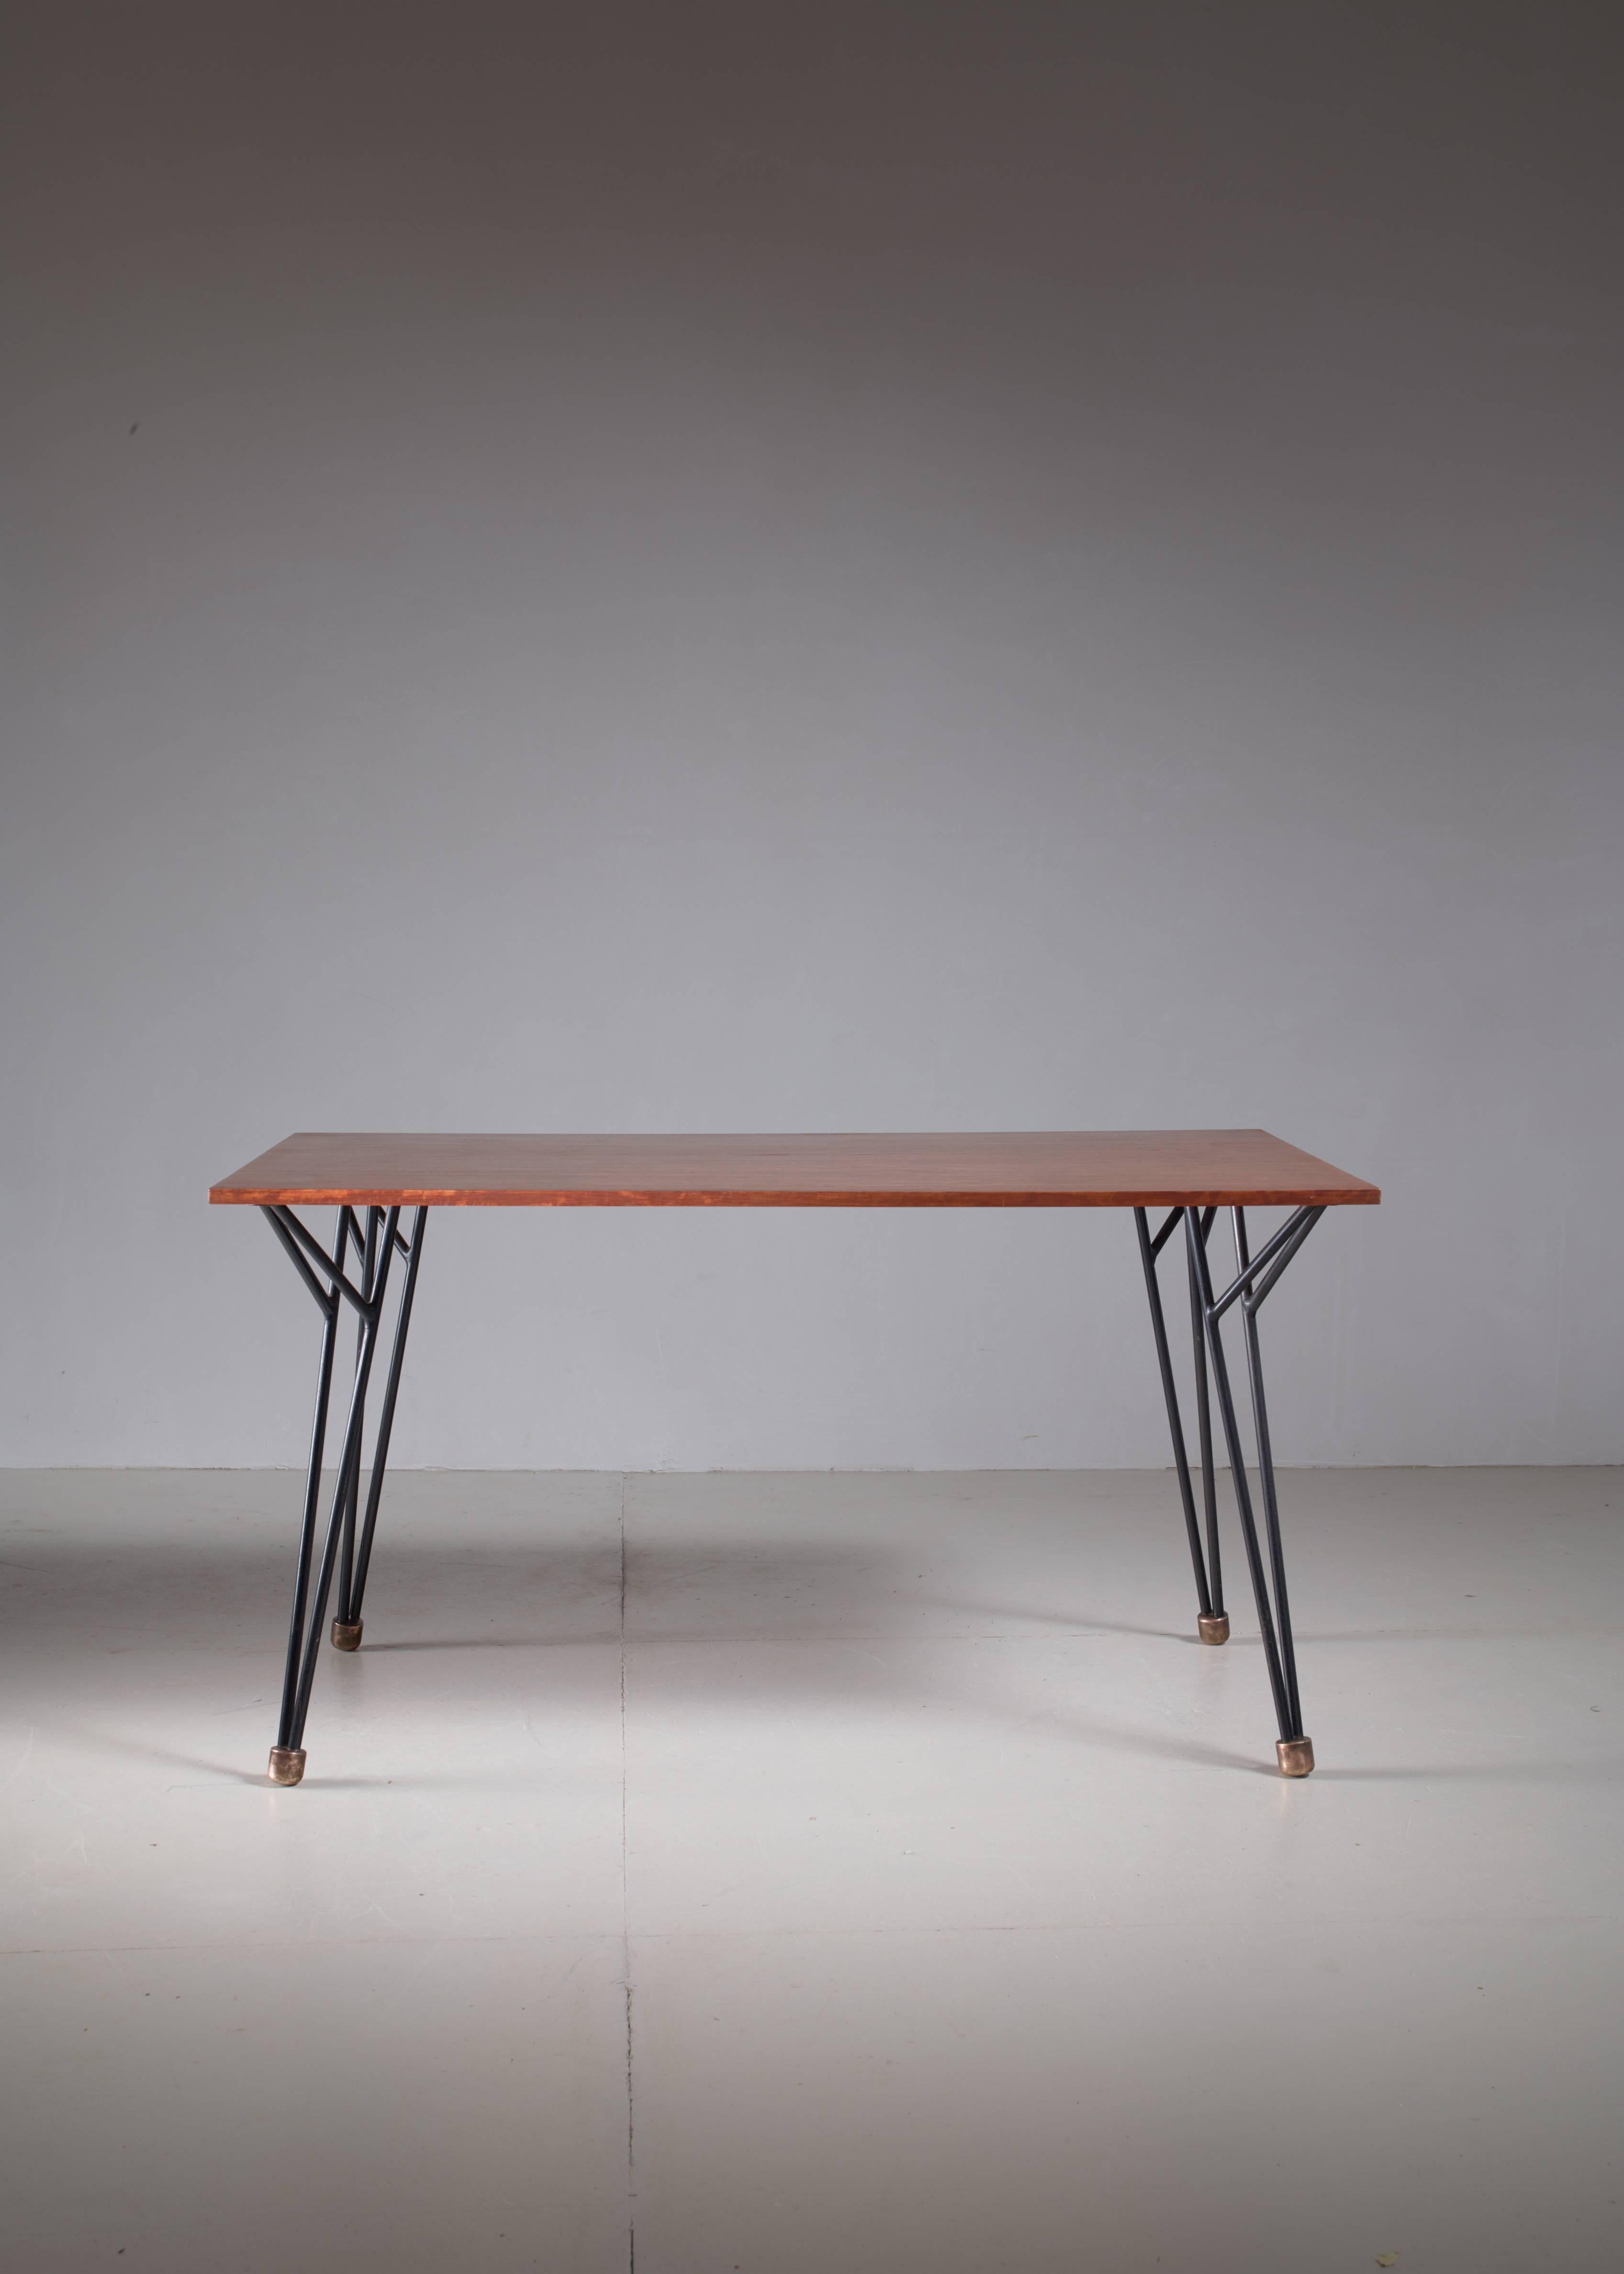 A rare Alfred Hendrickx work desk or dining table, designed circa 1958 and produced by Belform, Belgium. 

The top is made of wood with a root wood veneer and a frame of black tubular steel with massive brass feet. An extremely rare table and in